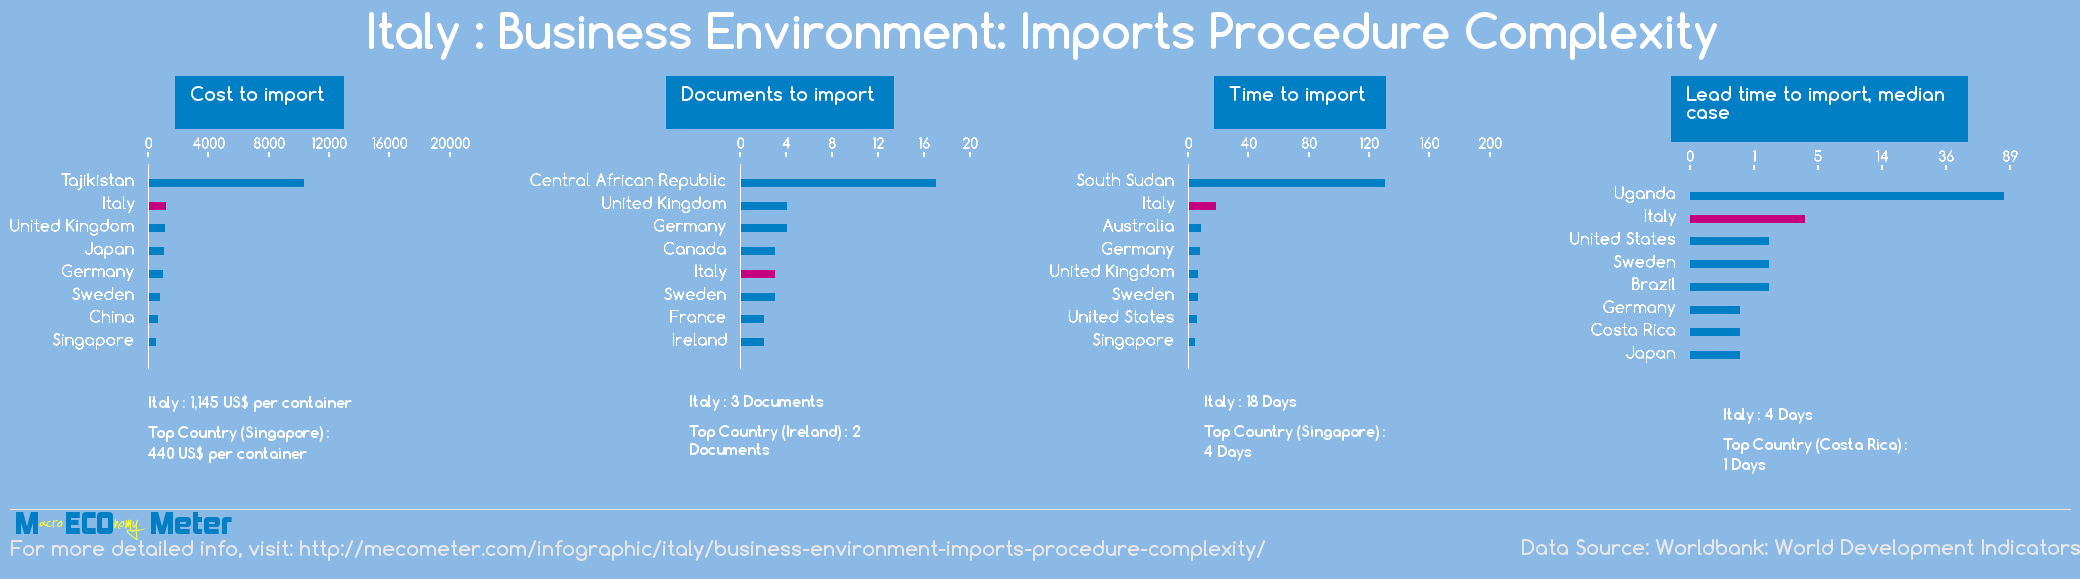 Italy : Business Environment: Imports Procedure Complexity